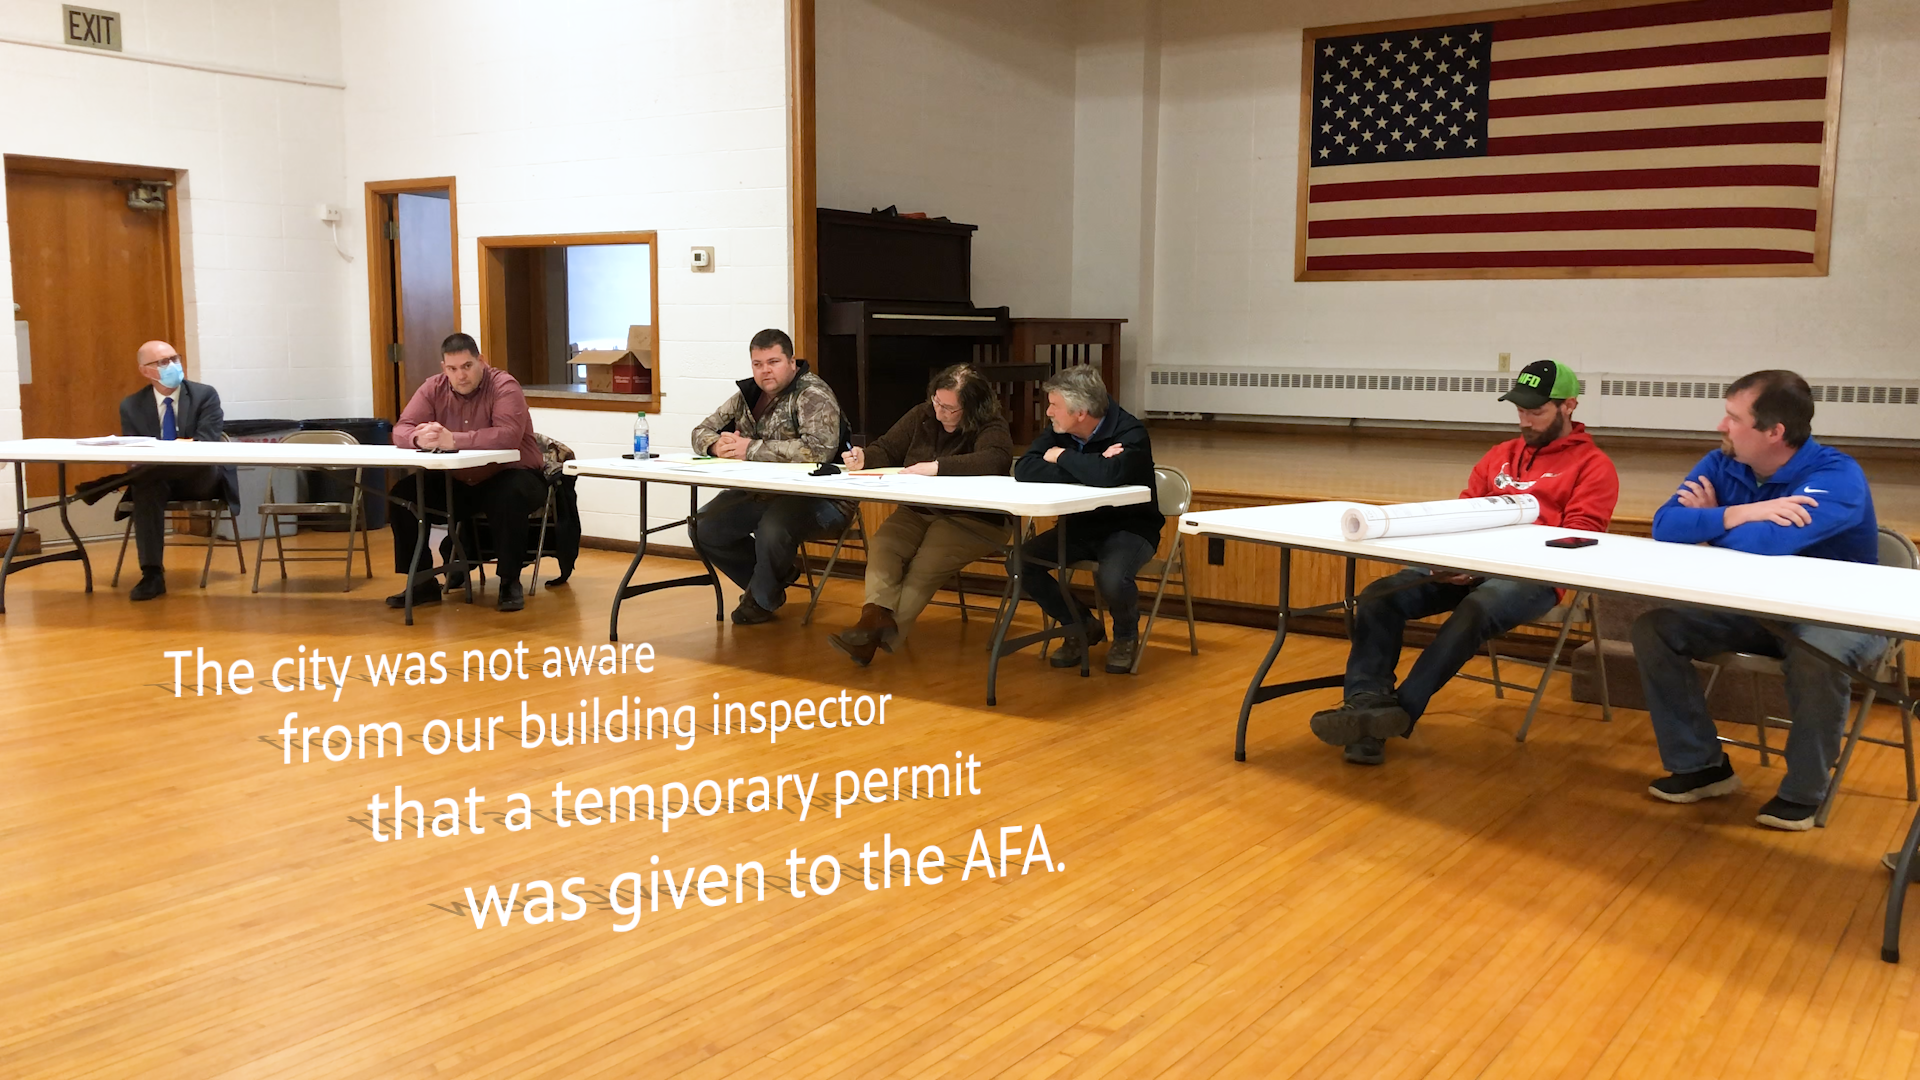 A photo of the Murdock City Council during their April meeting with text that says, "The city was not aware from our building inspector that a temporary permit was given to the AFA."